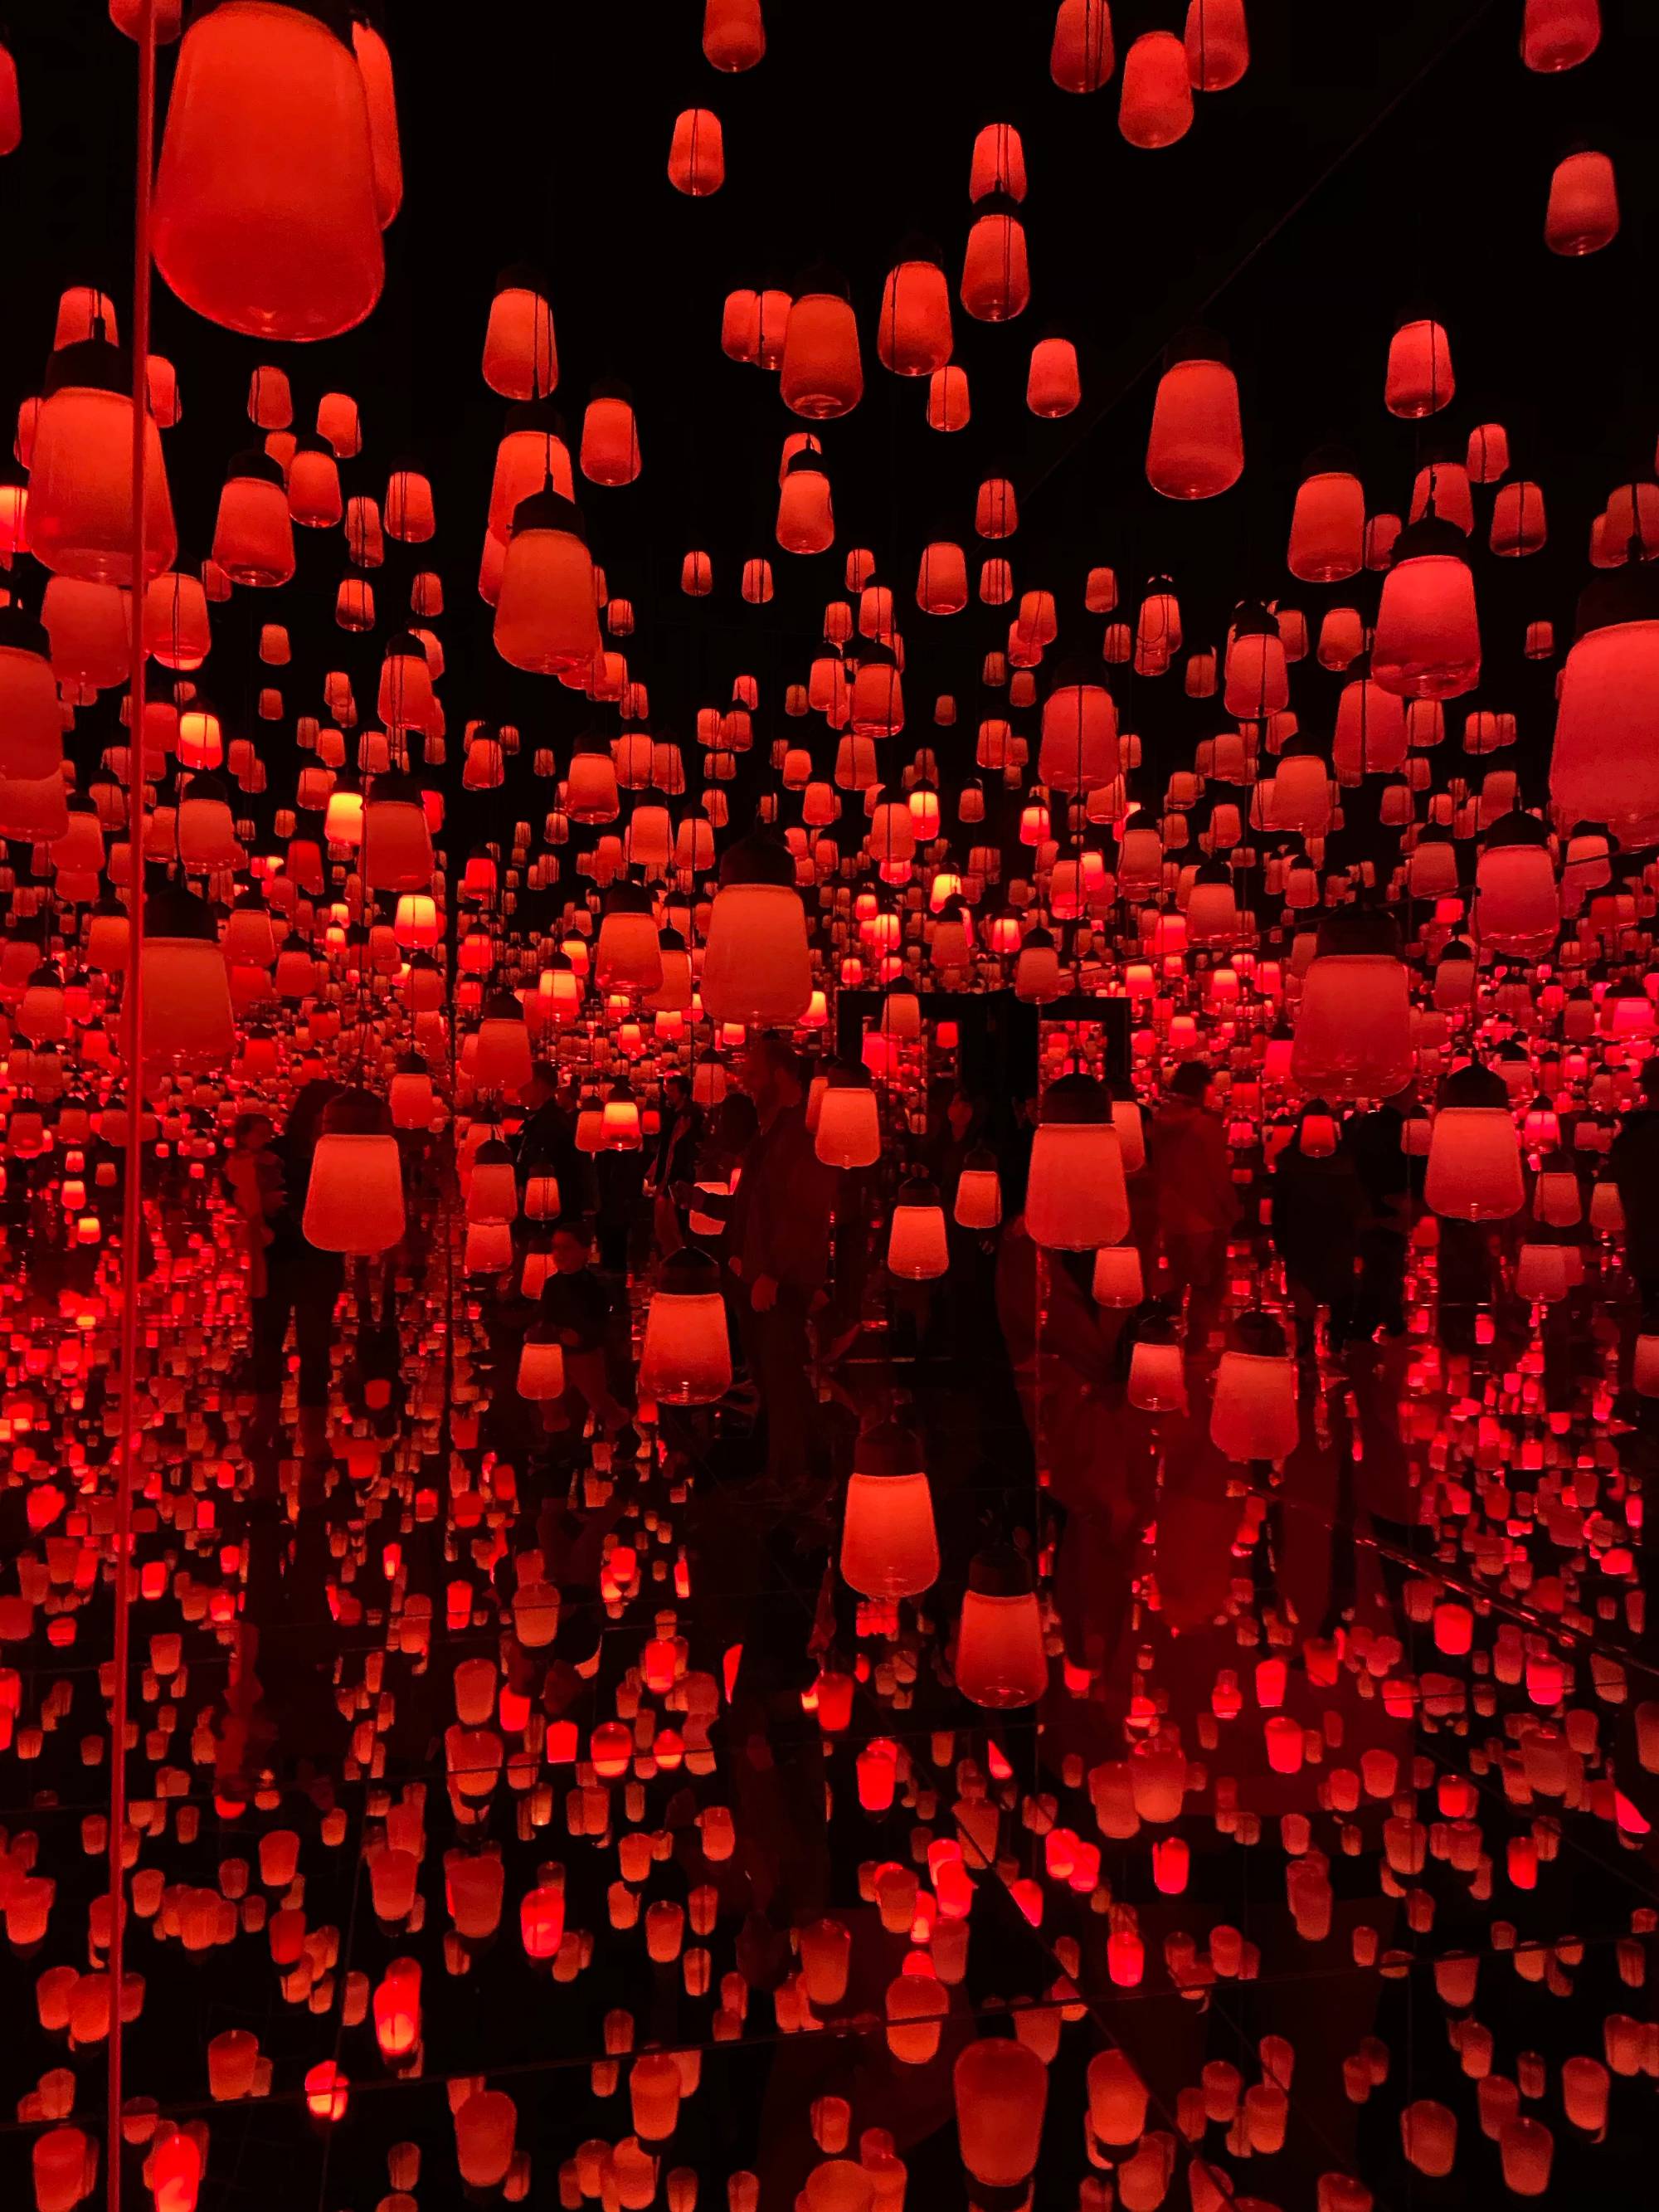 Colored photograph of red floating paper lanterns over water at night